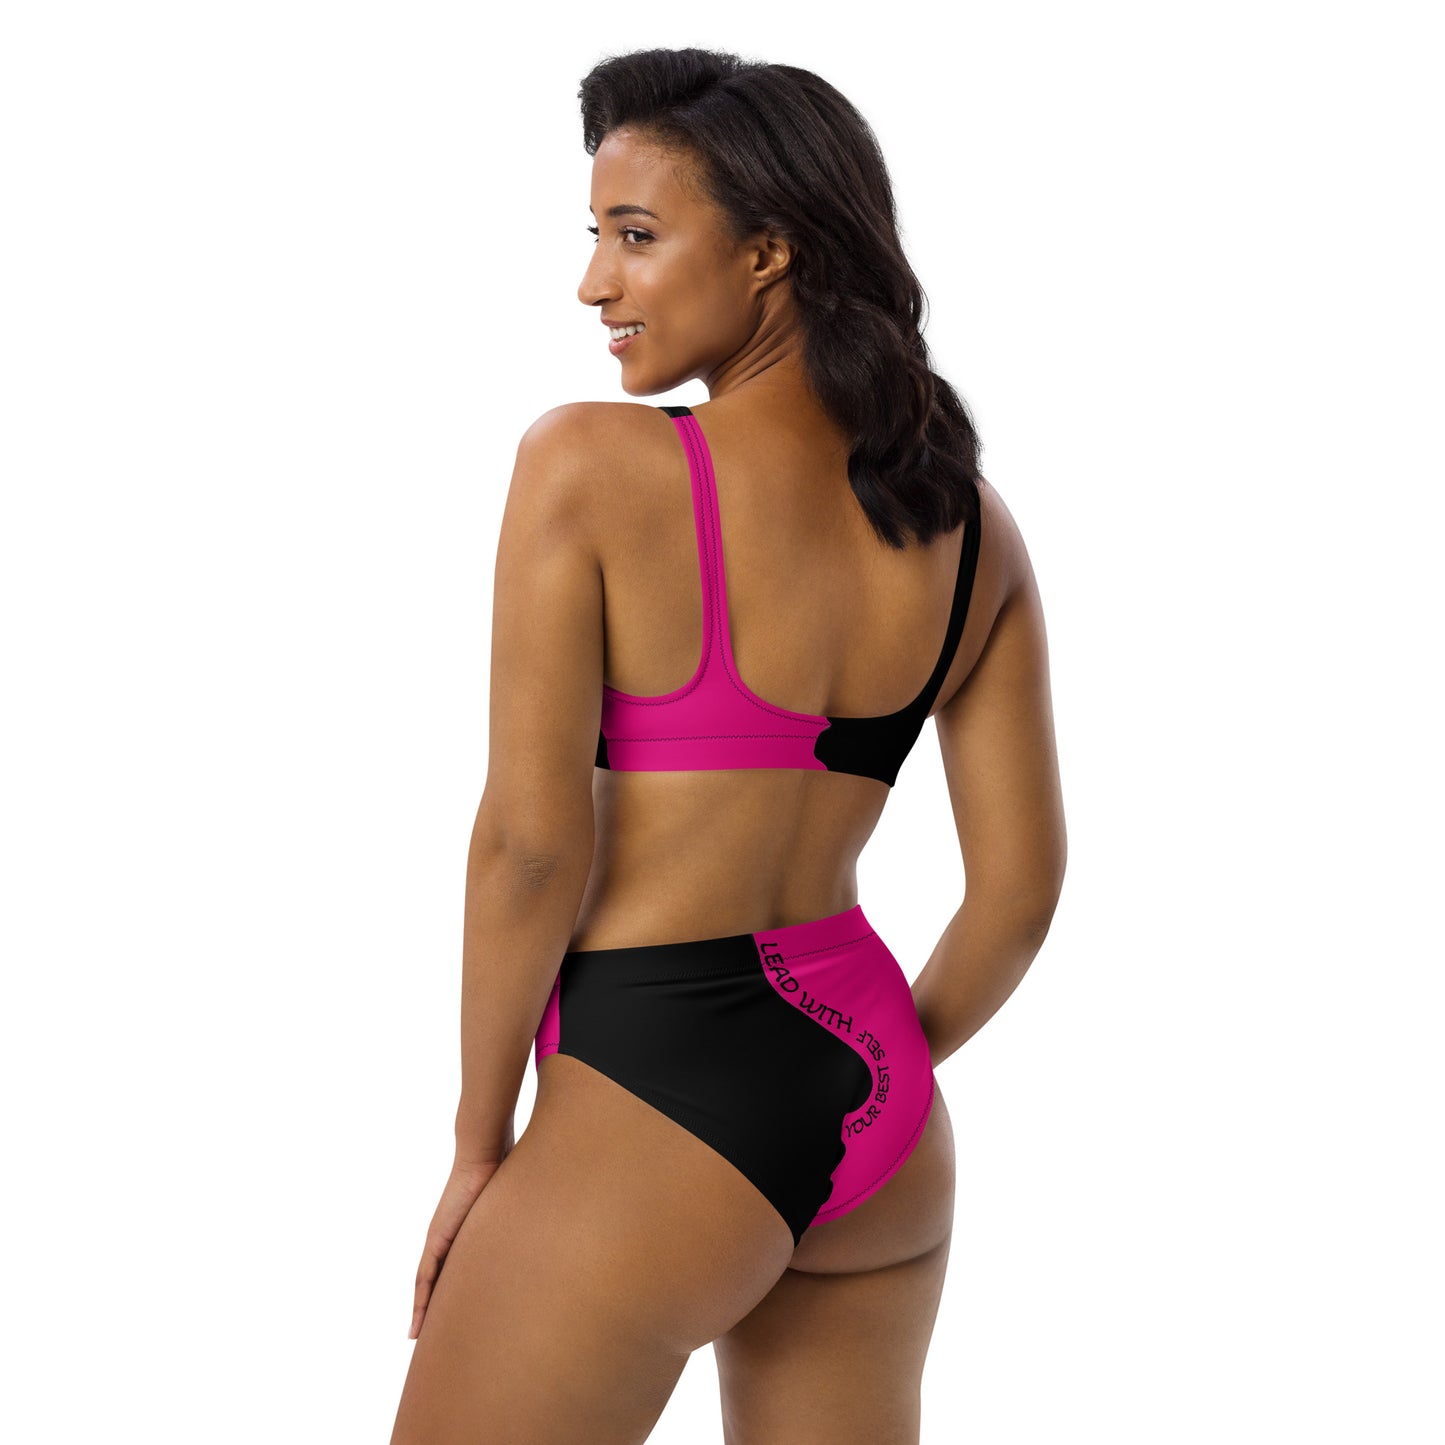 LBS Motivate Merch High-Waisted Bikini - Set Goals, Own the Spotlight - Your key to success and spotlight-worthy confidence!